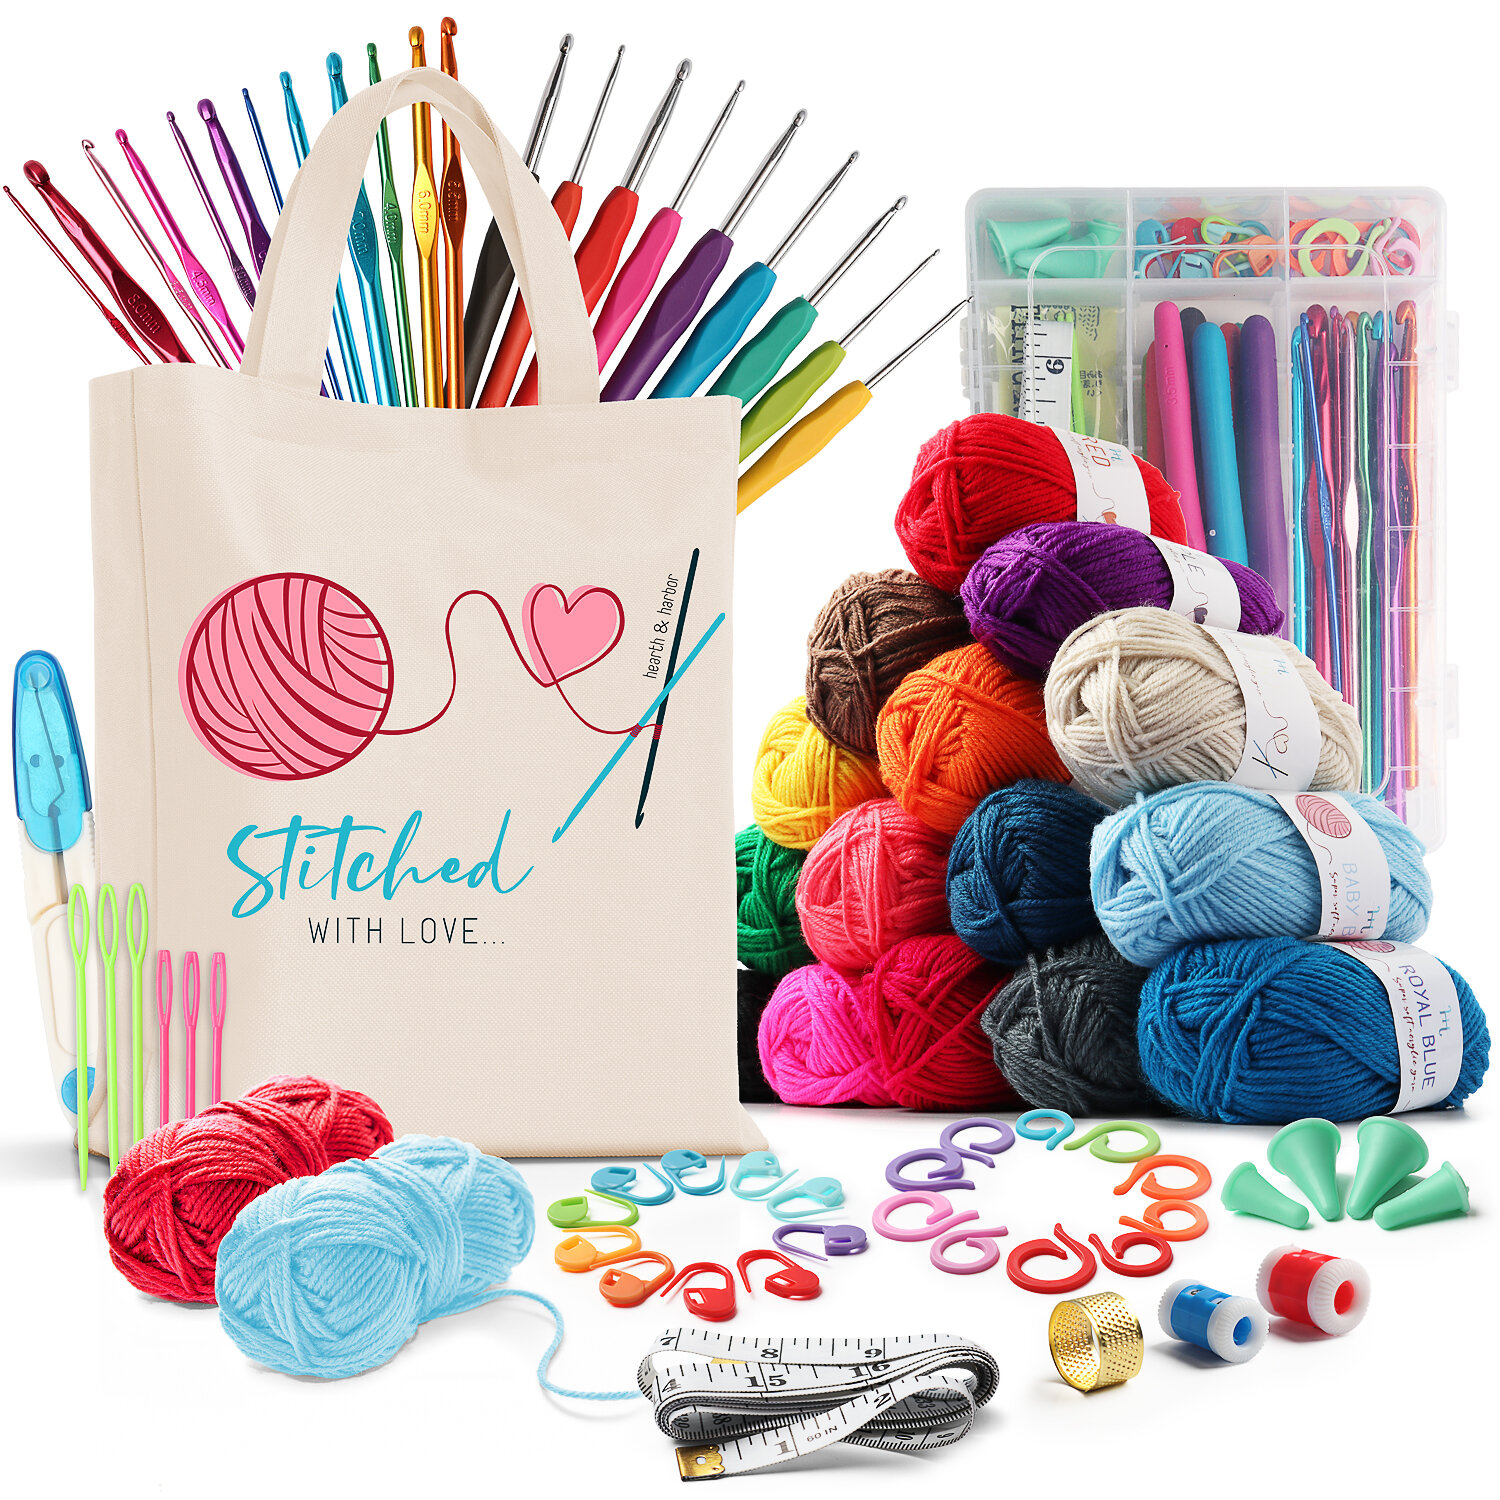 Crochet Kit with Hooks and Medium 4 Acrylic Yarn, Knitting Supplies (55  Pieces), PACK - Kroger